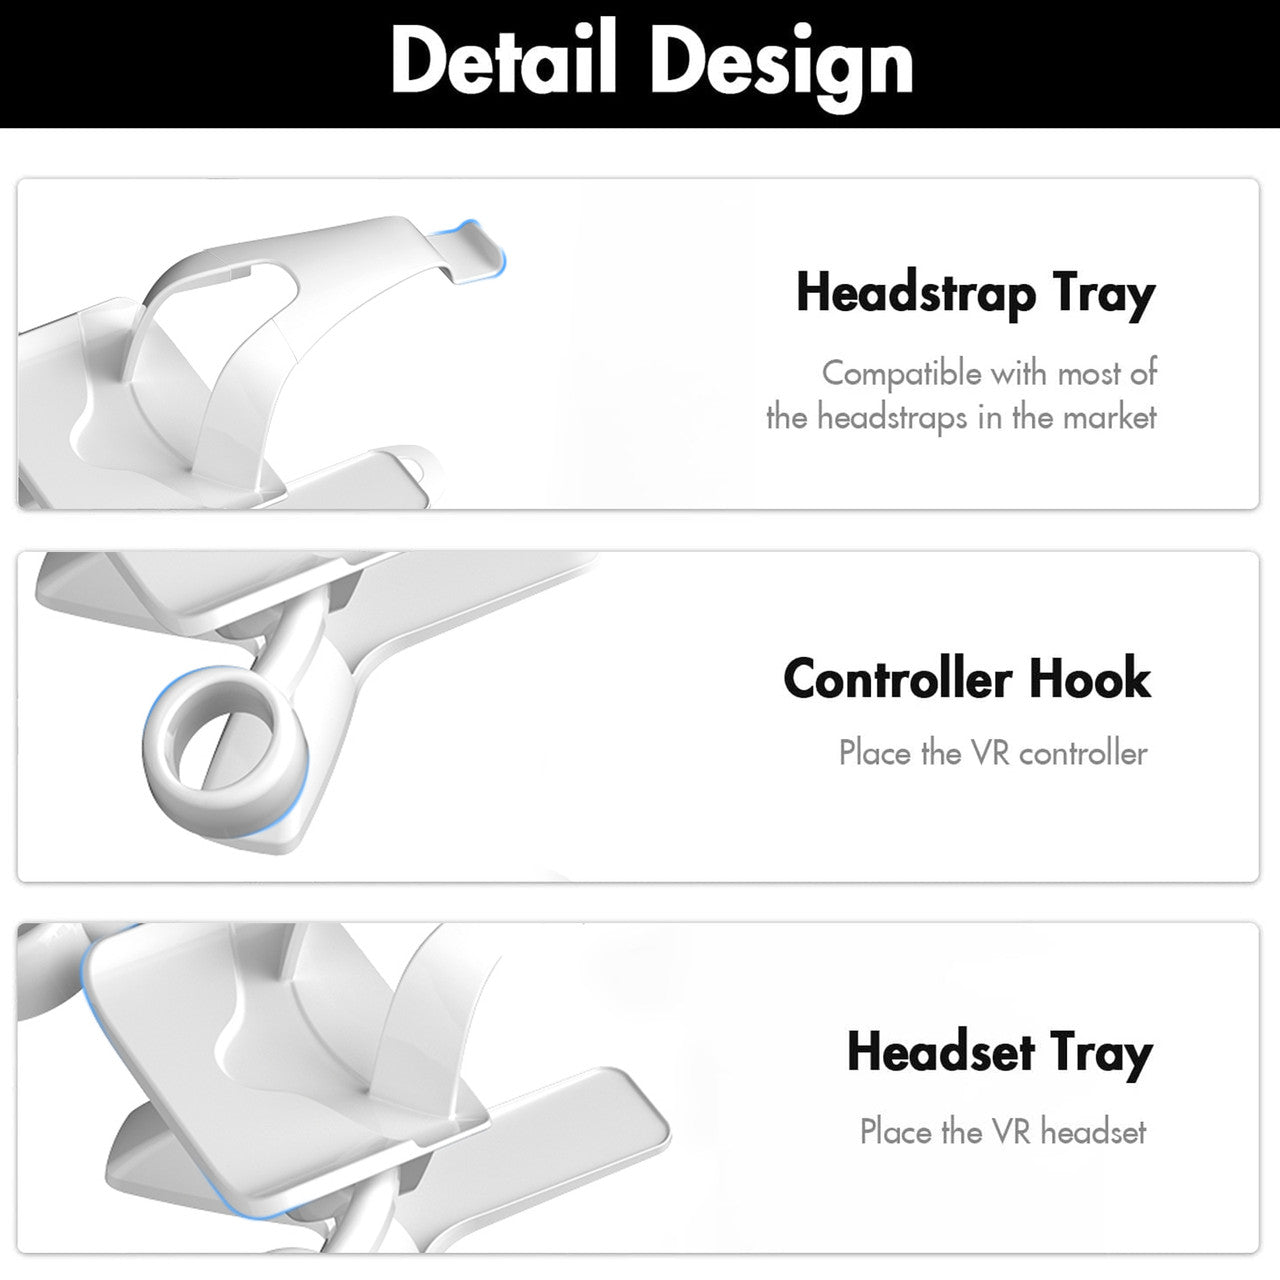 VR Stand Compatible - For Quest 2, Quest, Rift, Rift S, Valve Index Headsets & Touch Controllers (White)